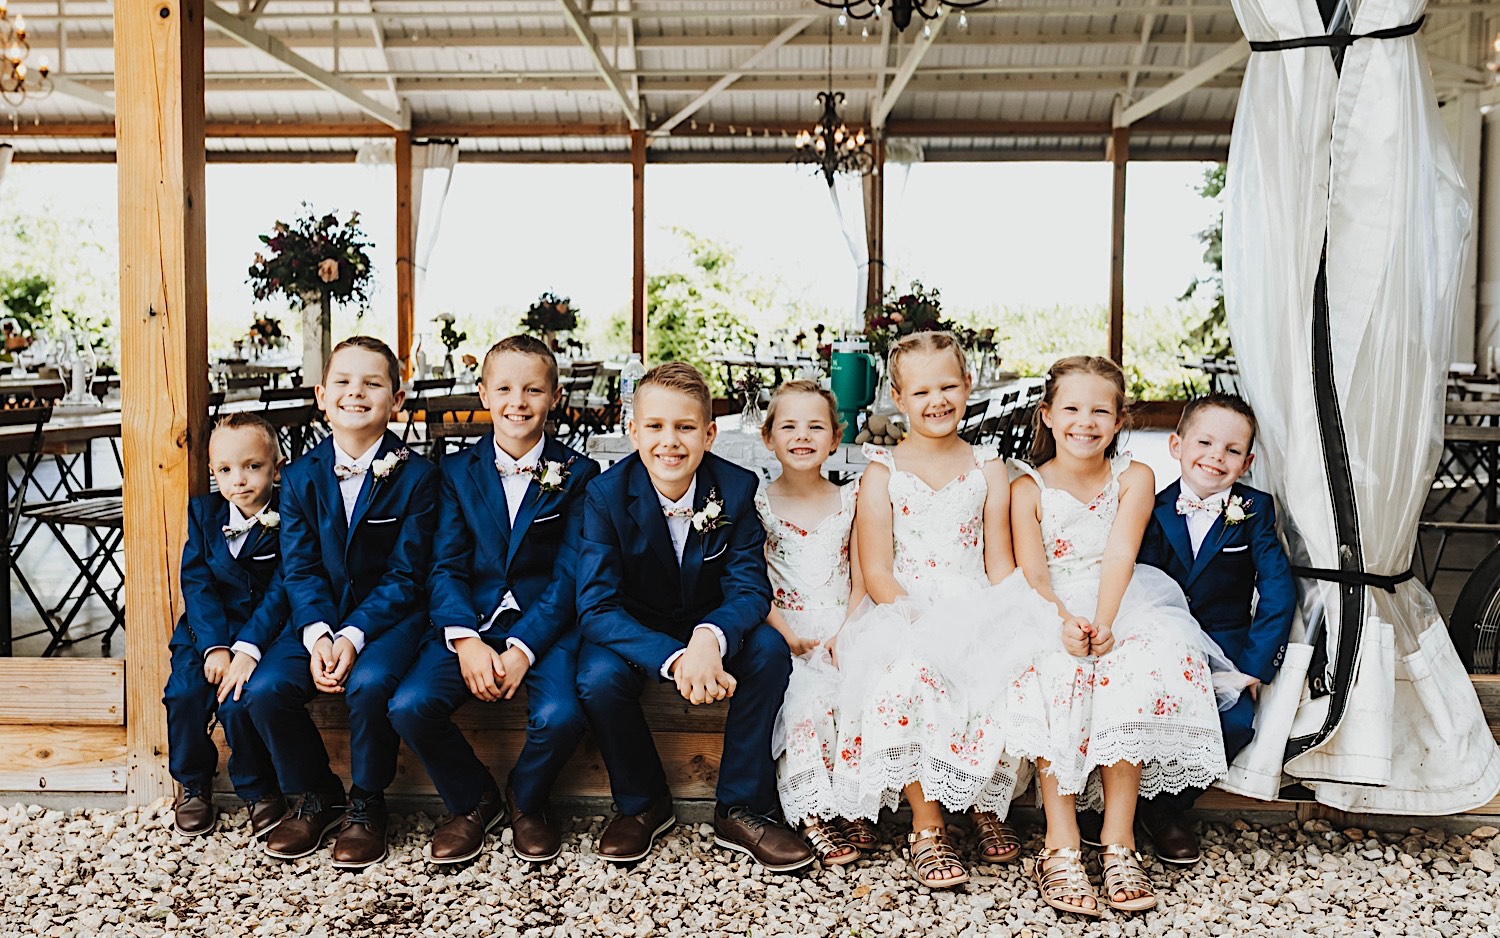 A group of children dressed for a wedding sit and smile at the camera while outside the reception space of the wedding venue Legacy Hill Farm